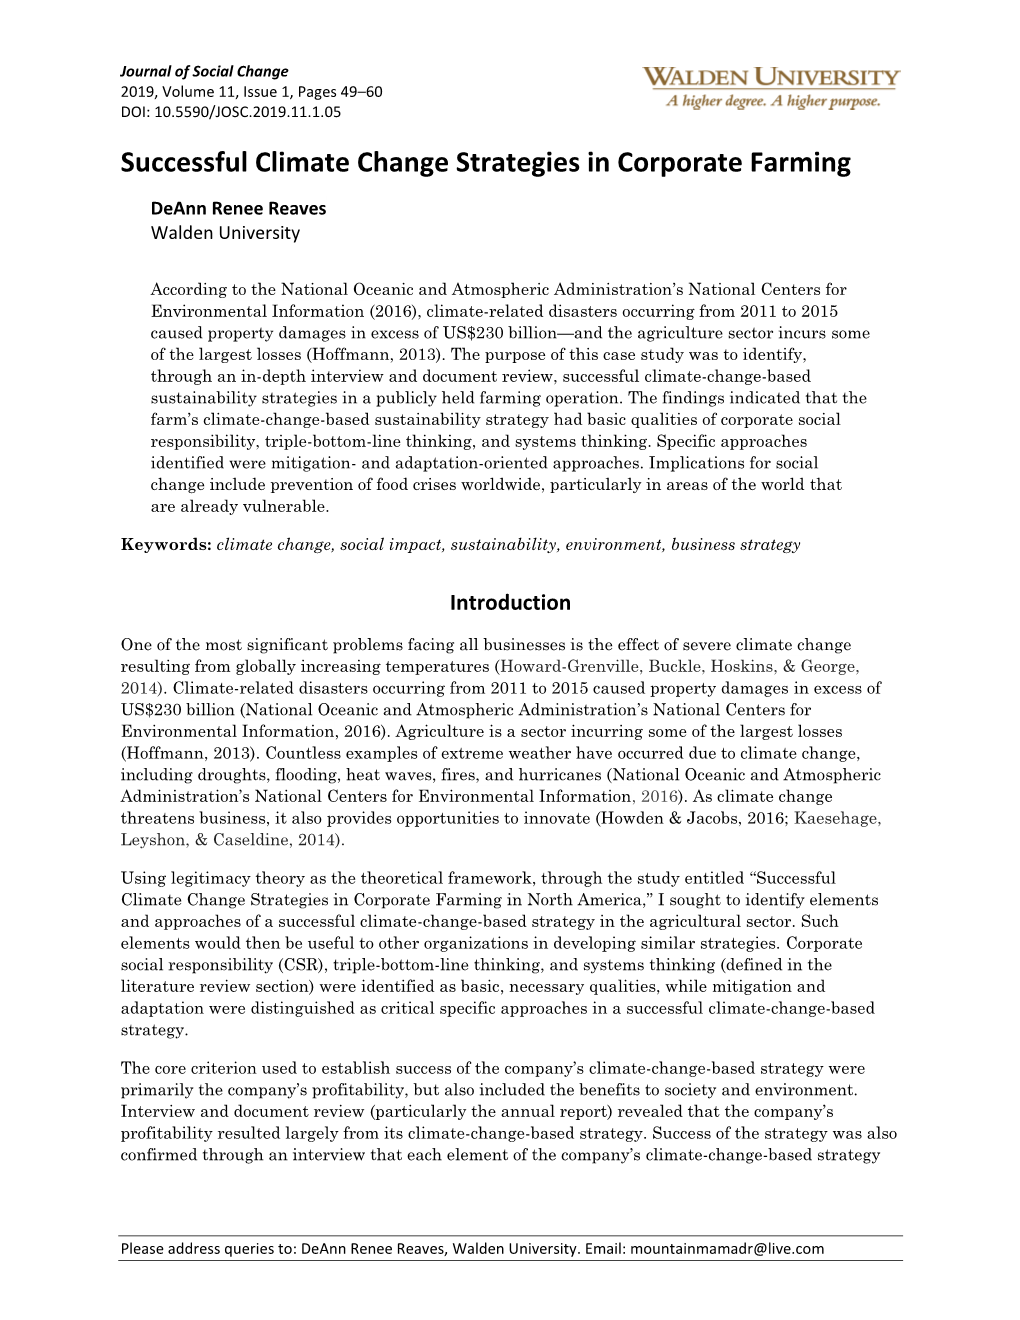 Successful Climate Change Strategies in Corporate Farming